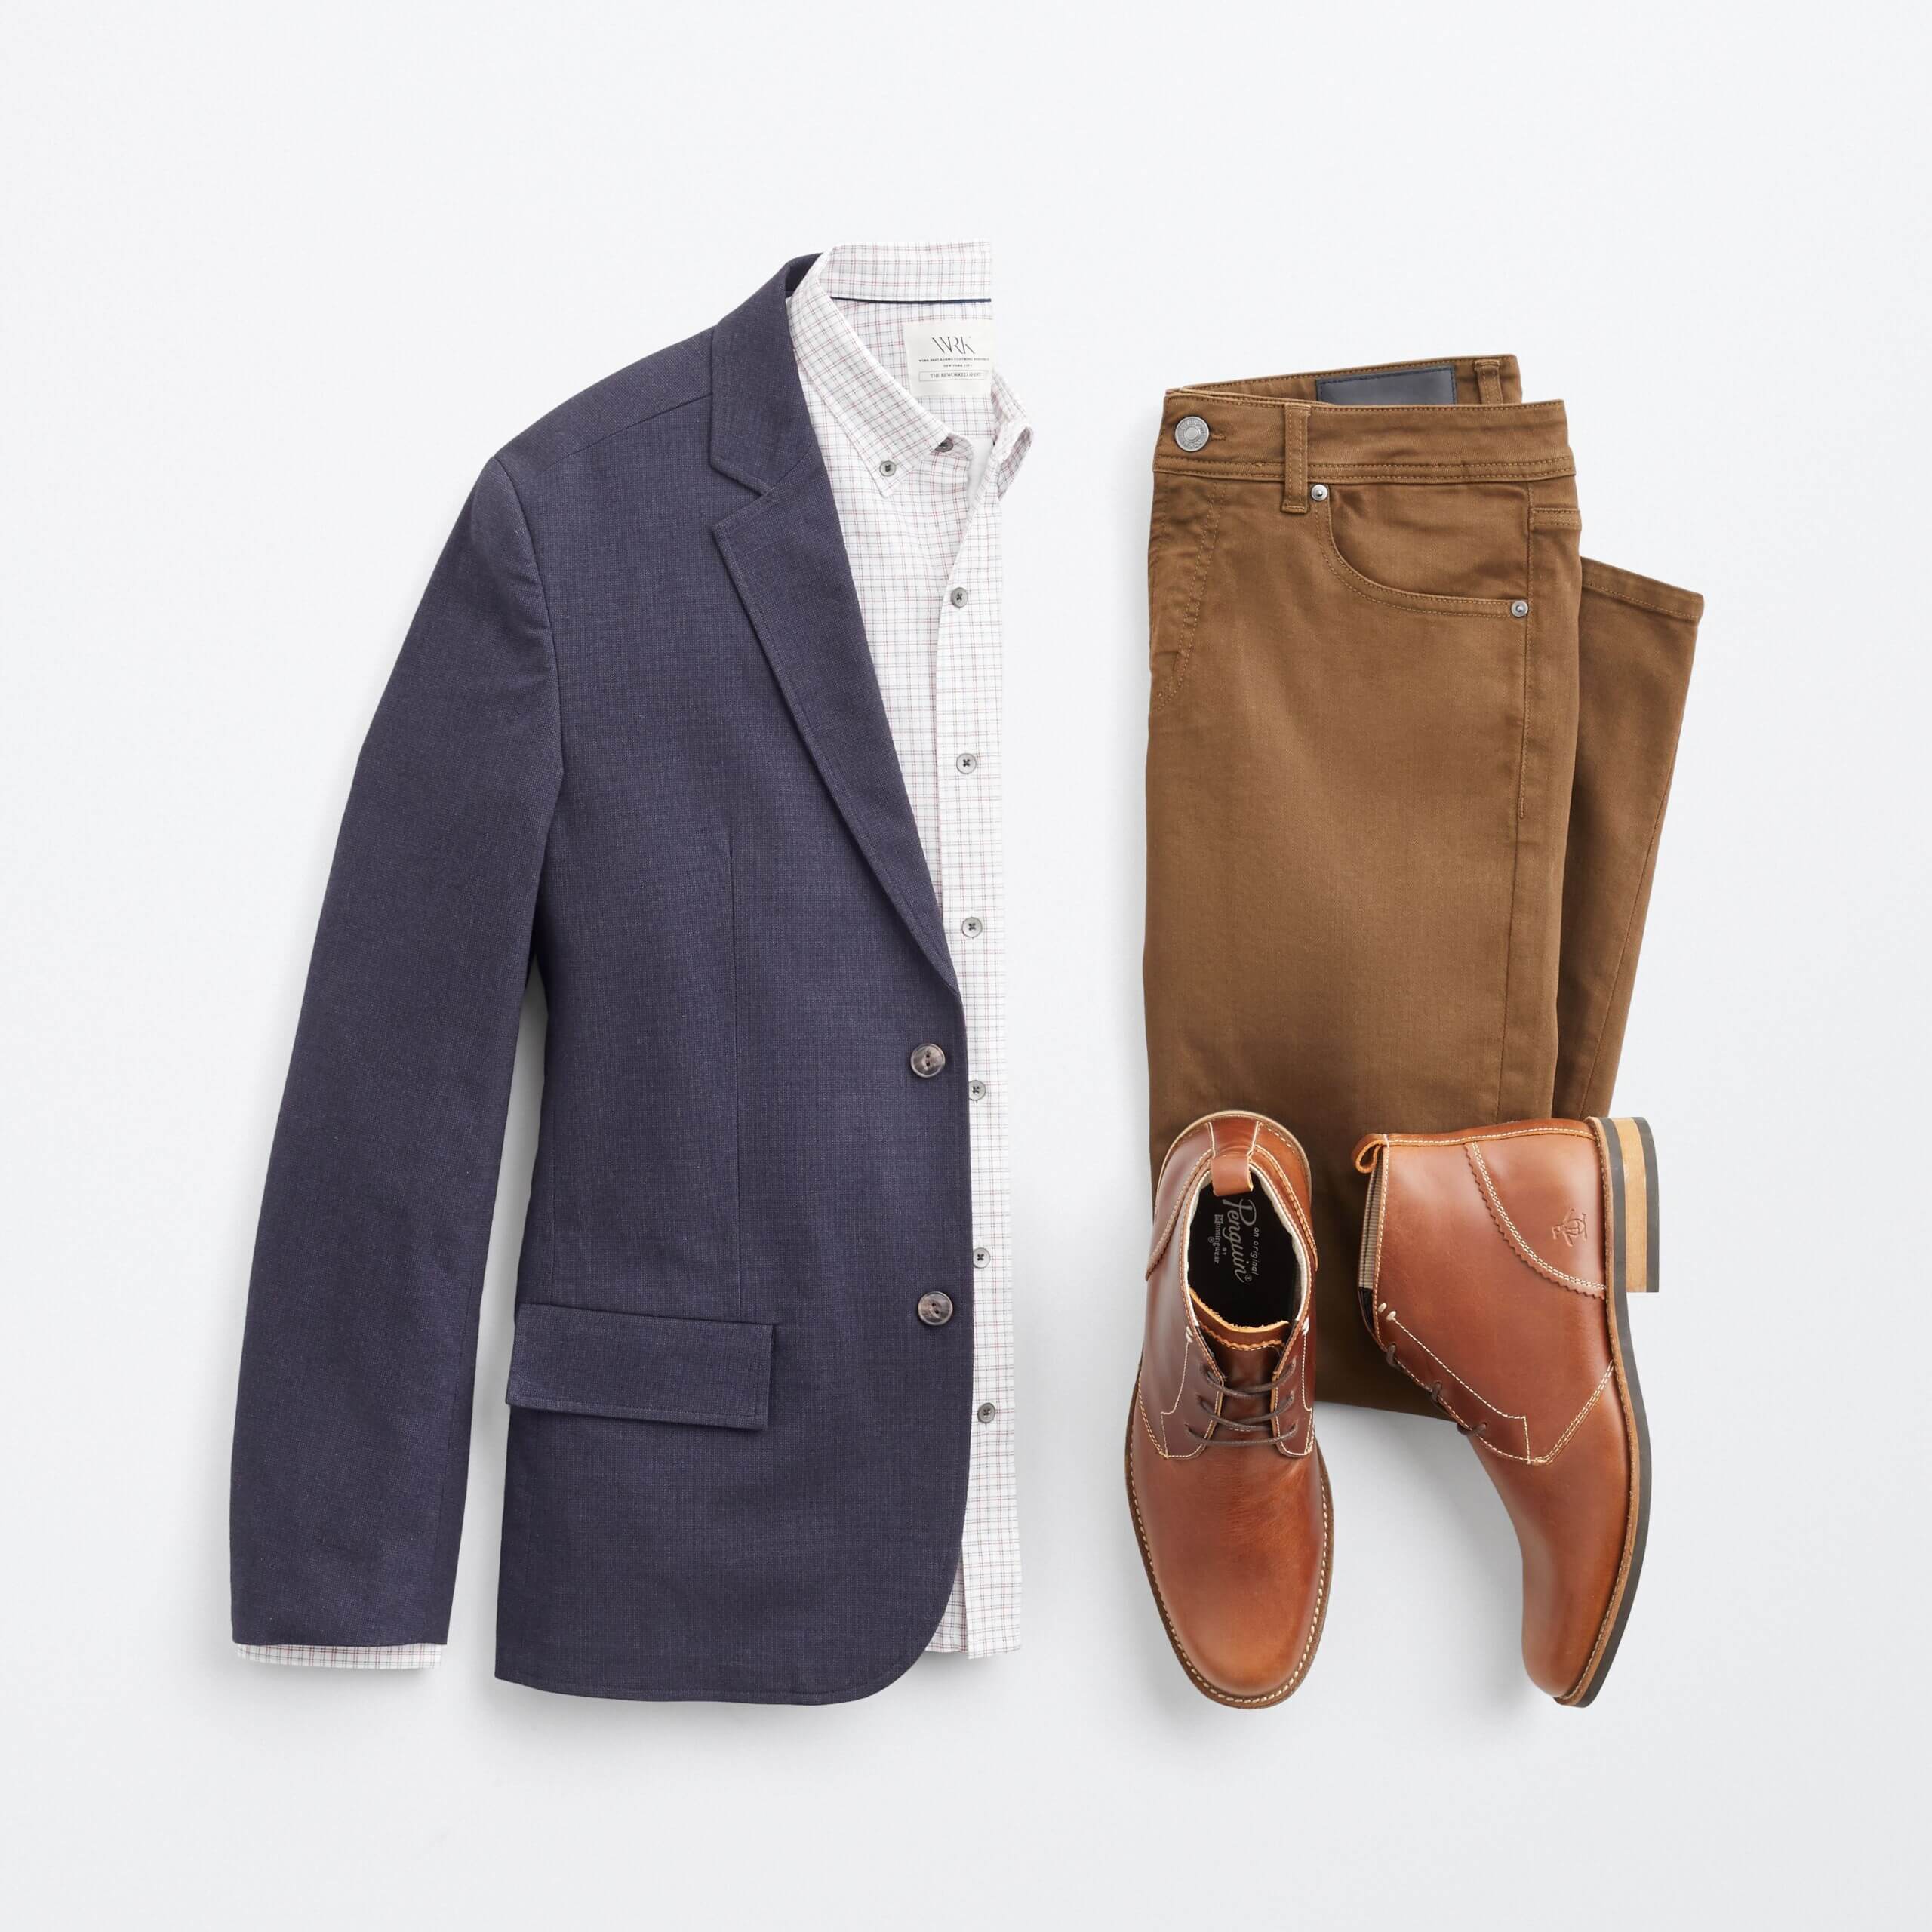 Stitch Fix men’s outfit with navy blazer over white plaid button-down shirt, brown jeans and cognac boots.